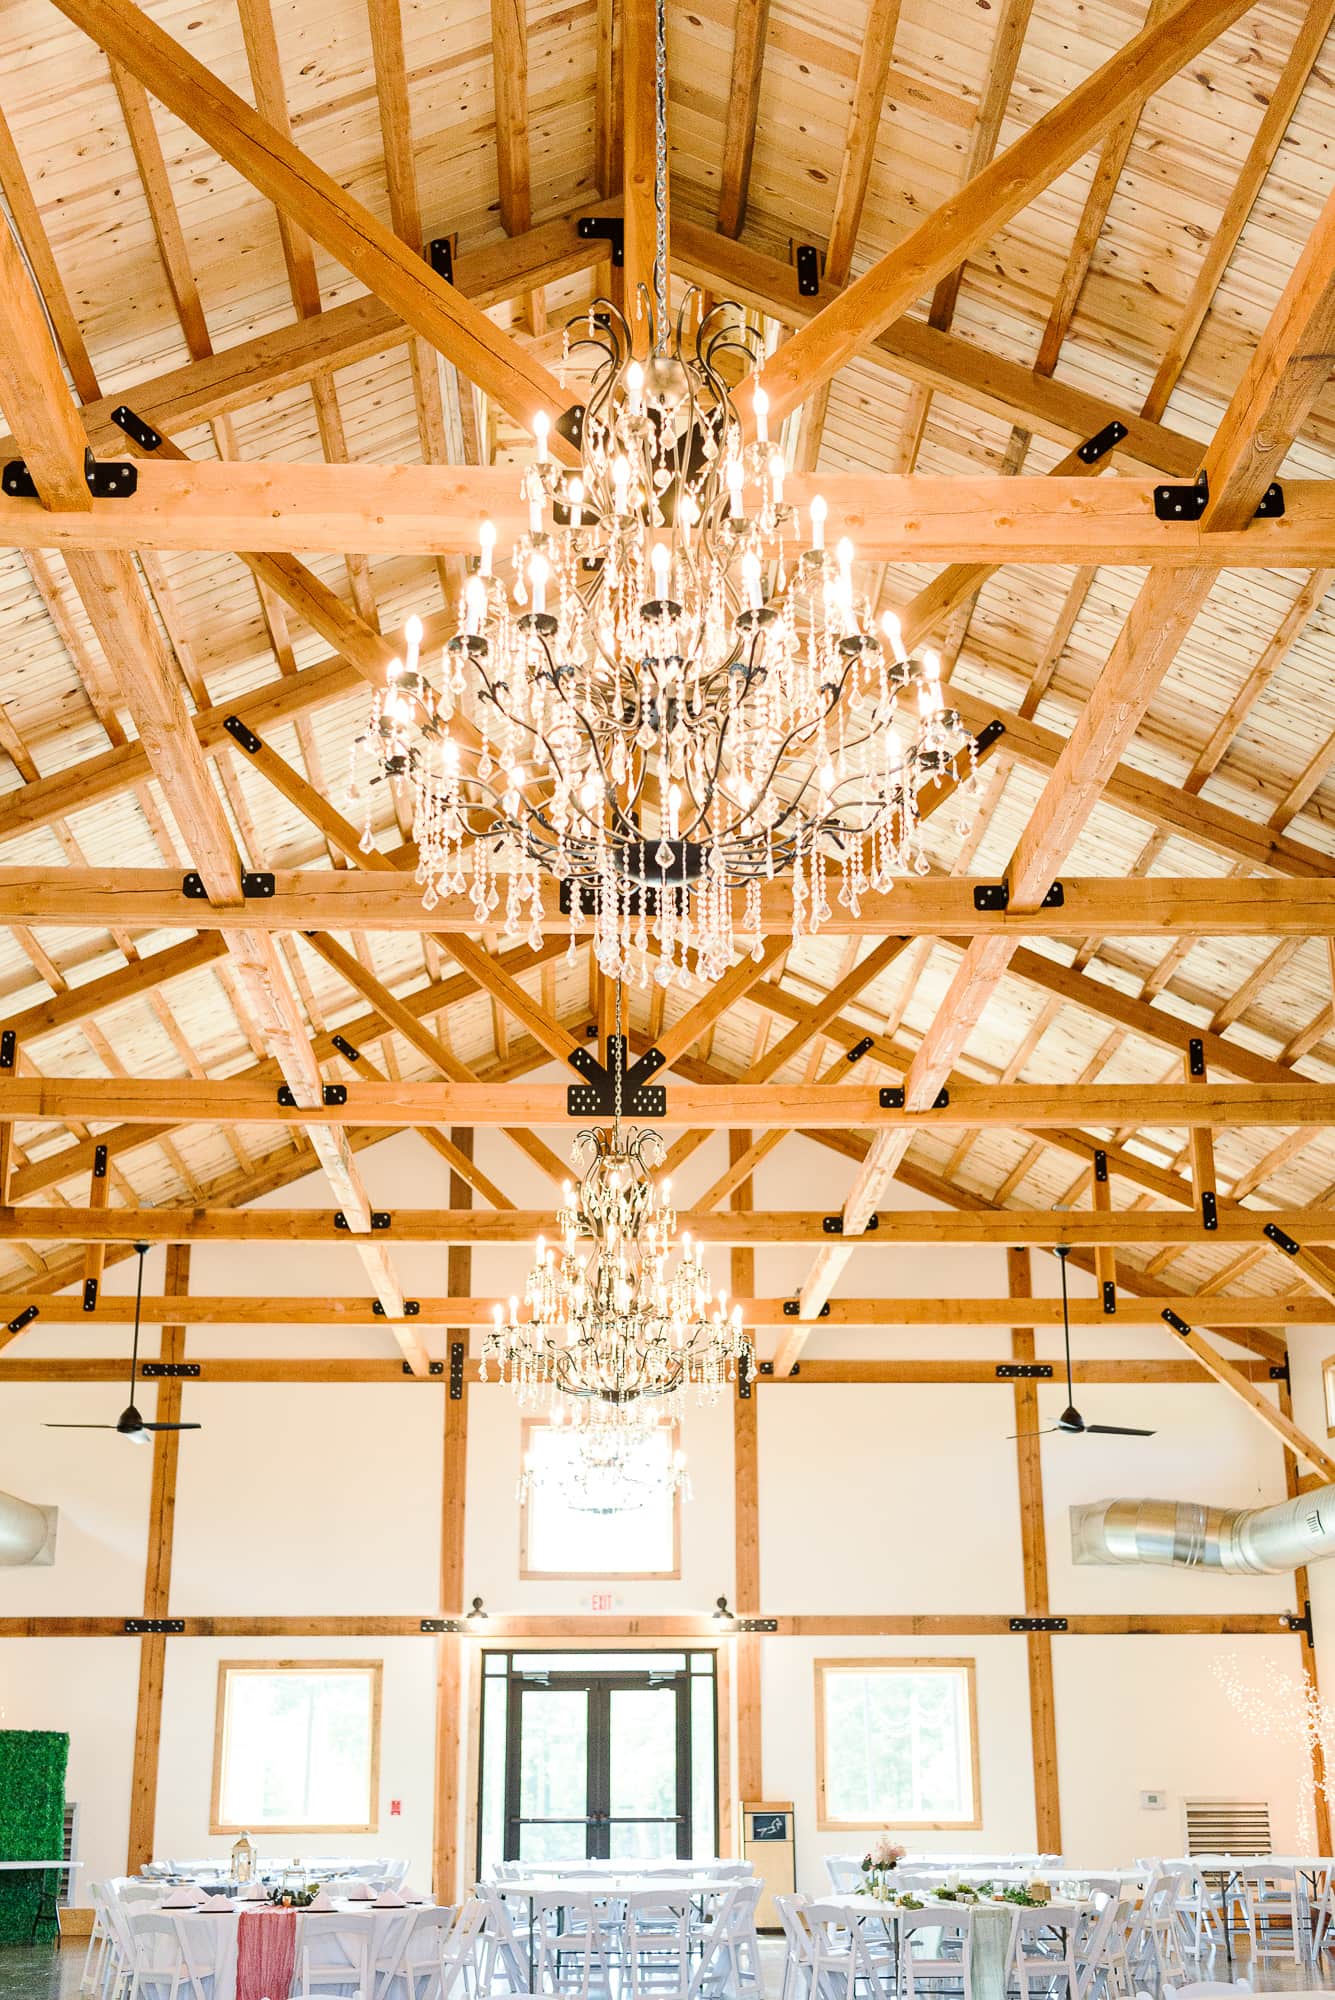 Chandeliers and exposed beams make up the ceiling in the Camelot Meadows hall.